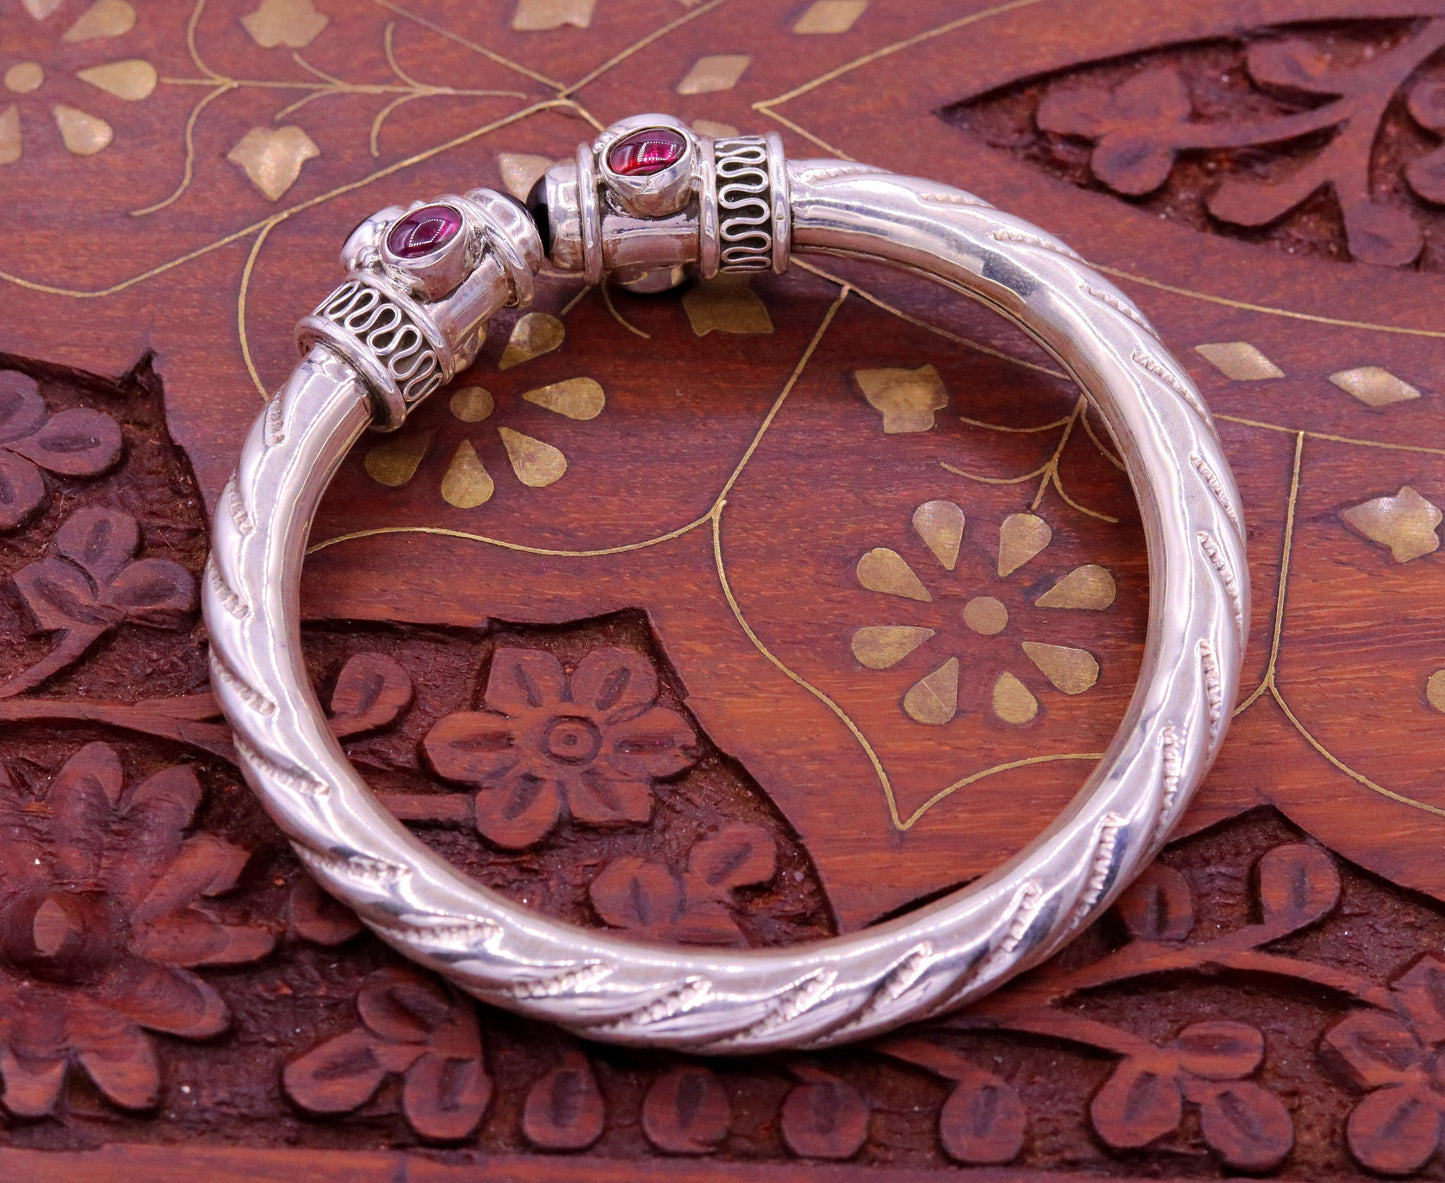 925 sterling silver handmade vintage antique design gorgeous bangle bracelet kada unisex gifting jewelry , belly dance tribal jewelry nsk221 - TRIBAL ORNAMENTS